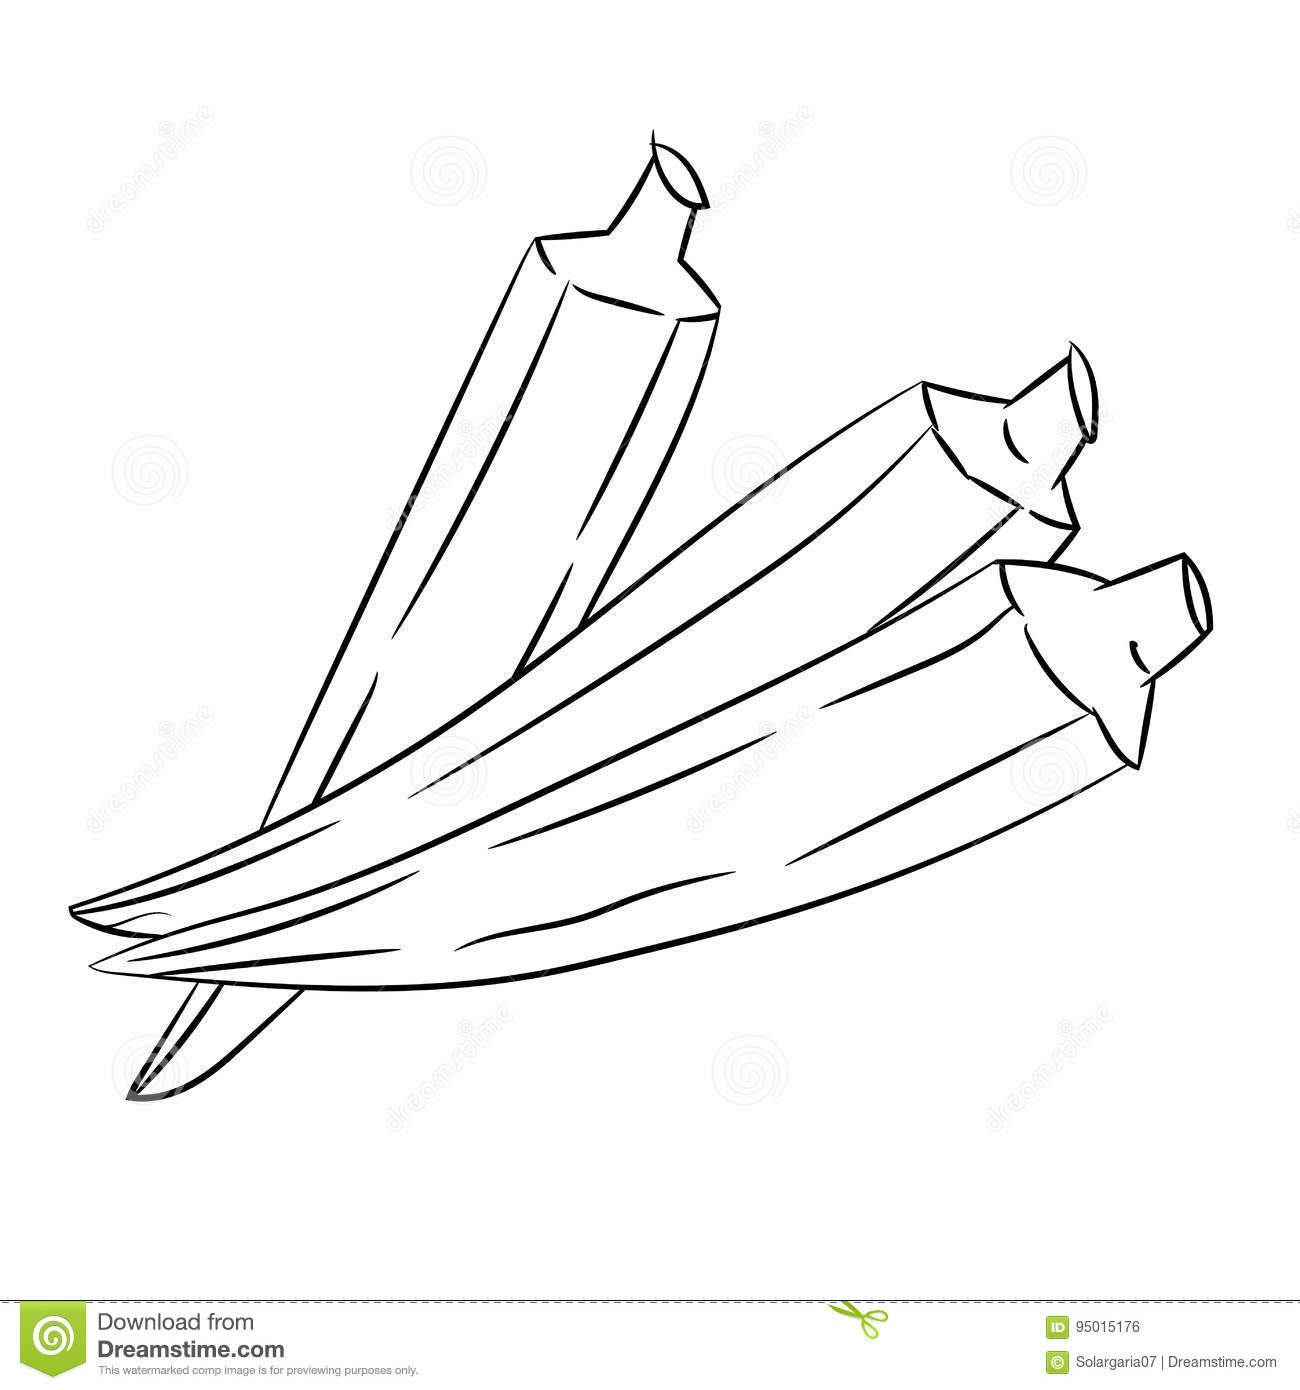 Okra clipart black and white